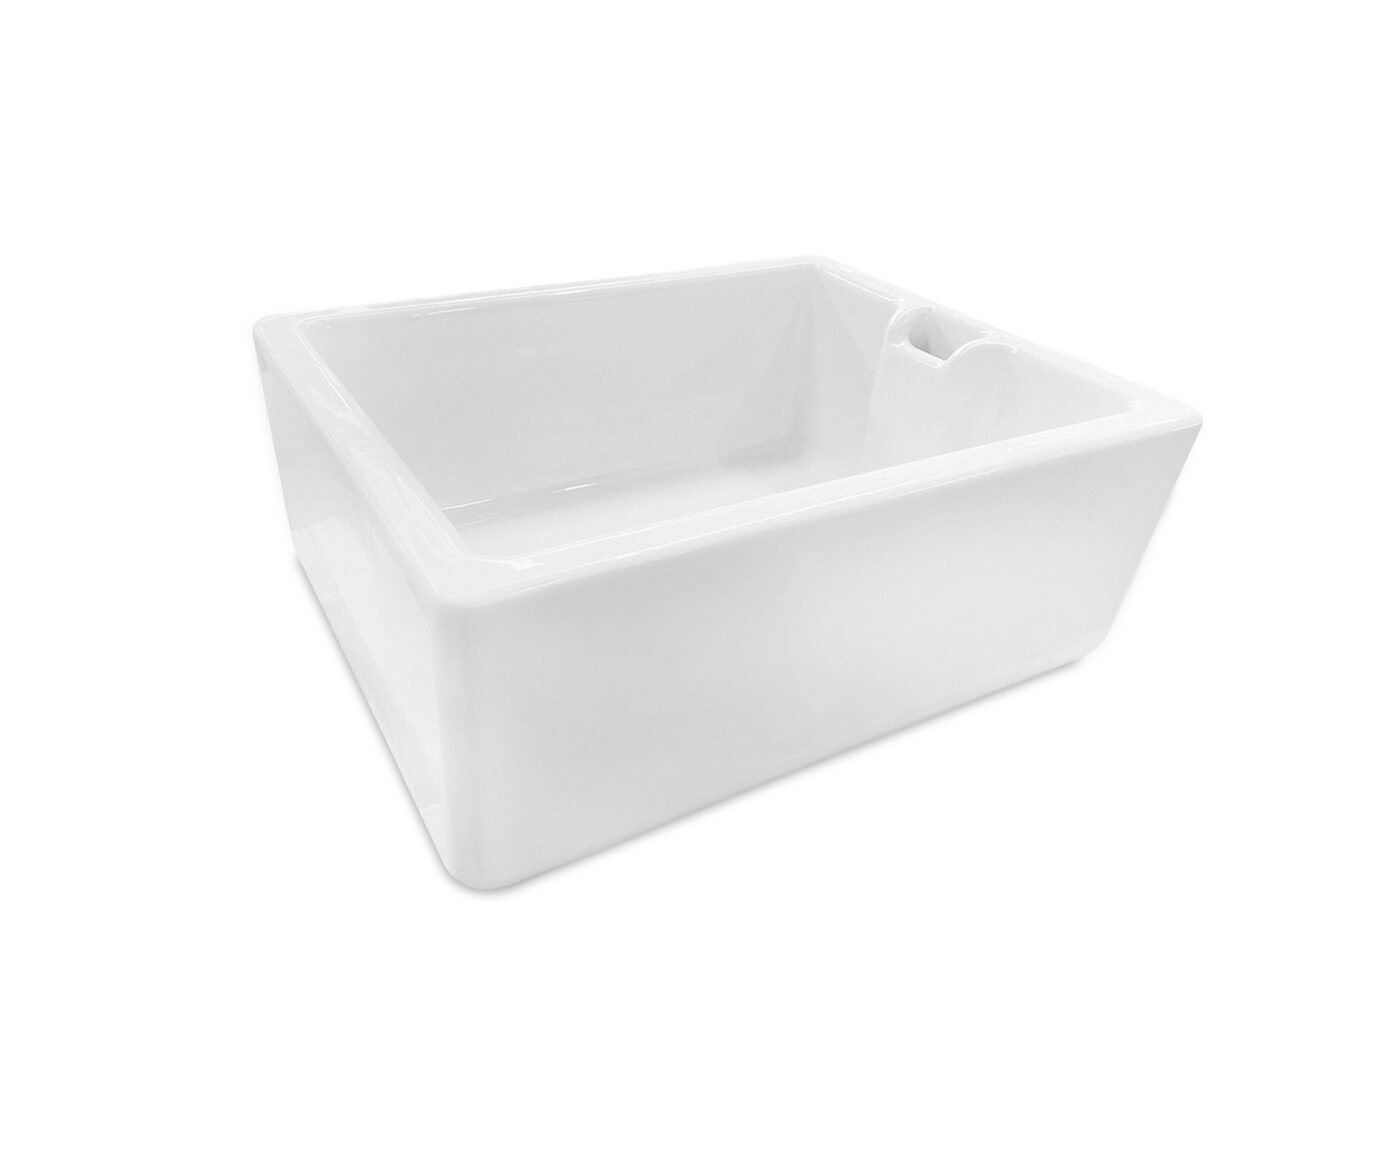 traditional-beflast-sink